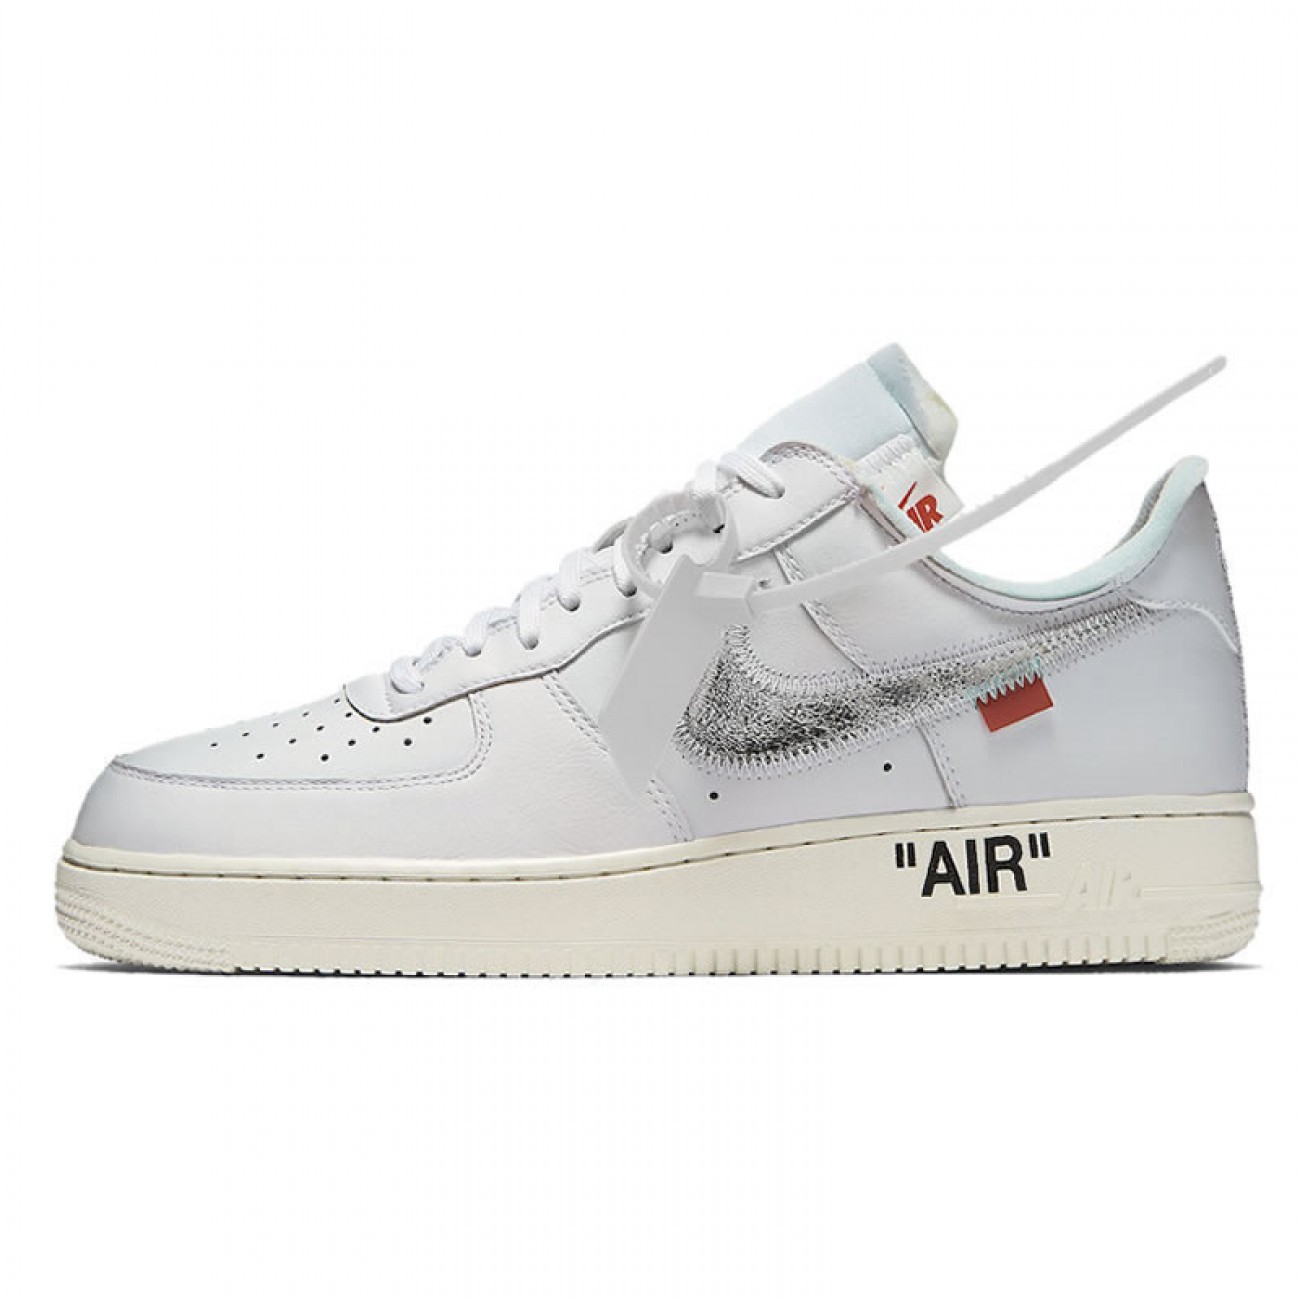 OFF WHITE X NIKE AIR FORCE 1 LOW 